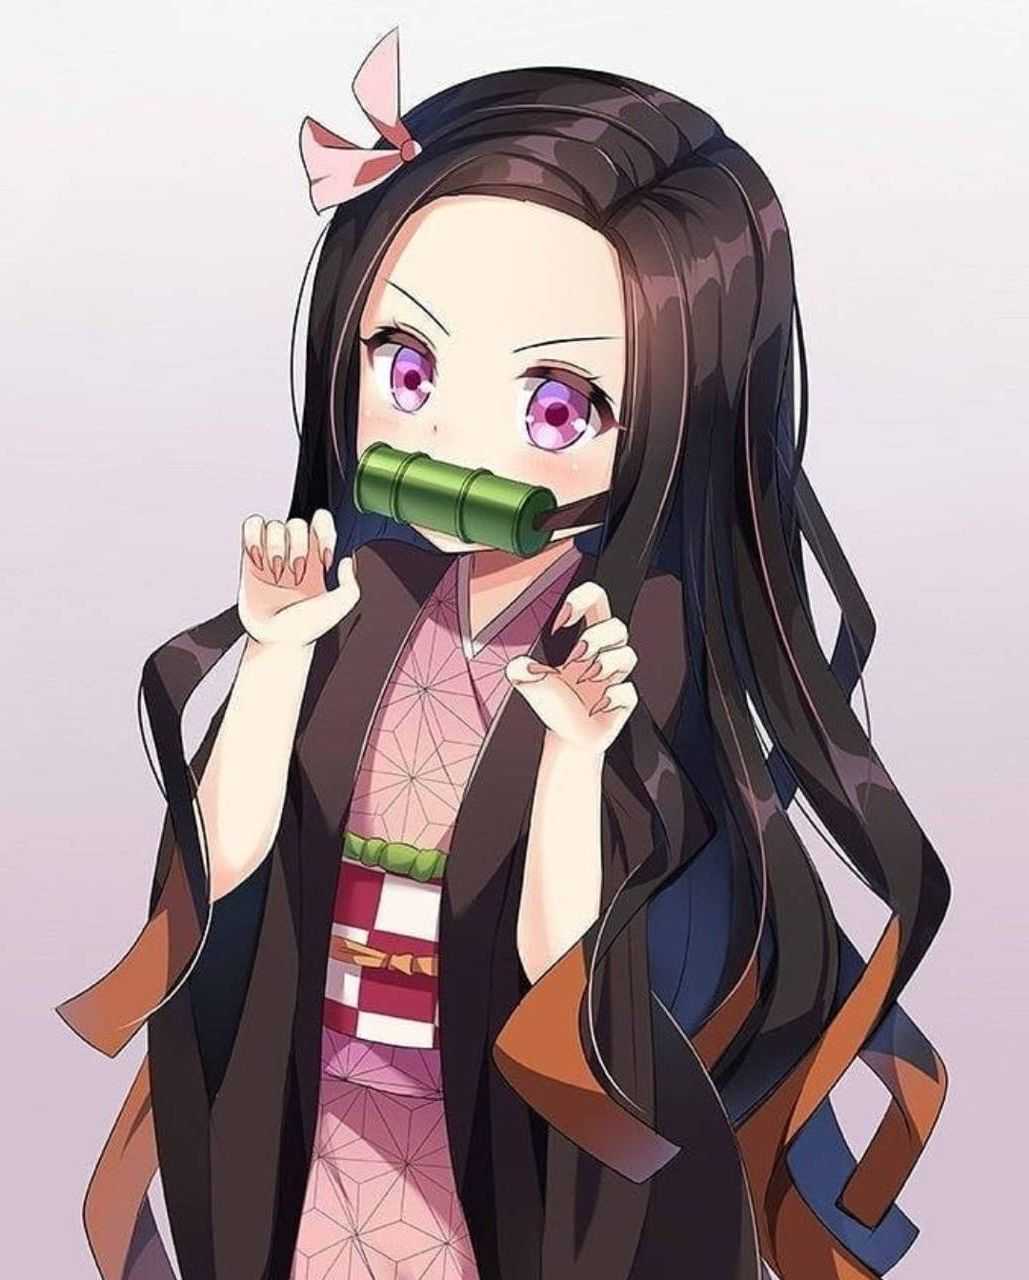 Get into Demon Slayer with Cute Nezuko background for your phone or desktop